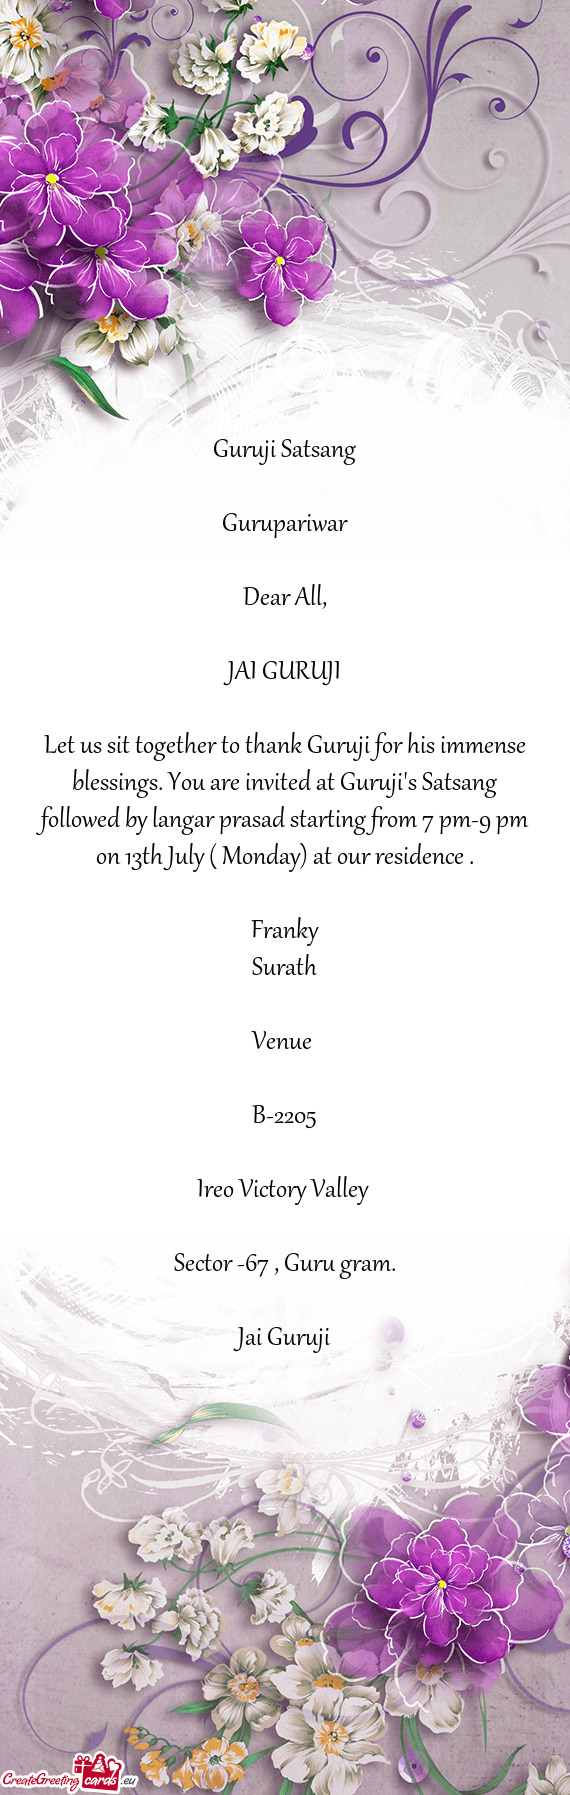 Let us sit together to thank Guruji for his immense blessings. You are invited at Guruji